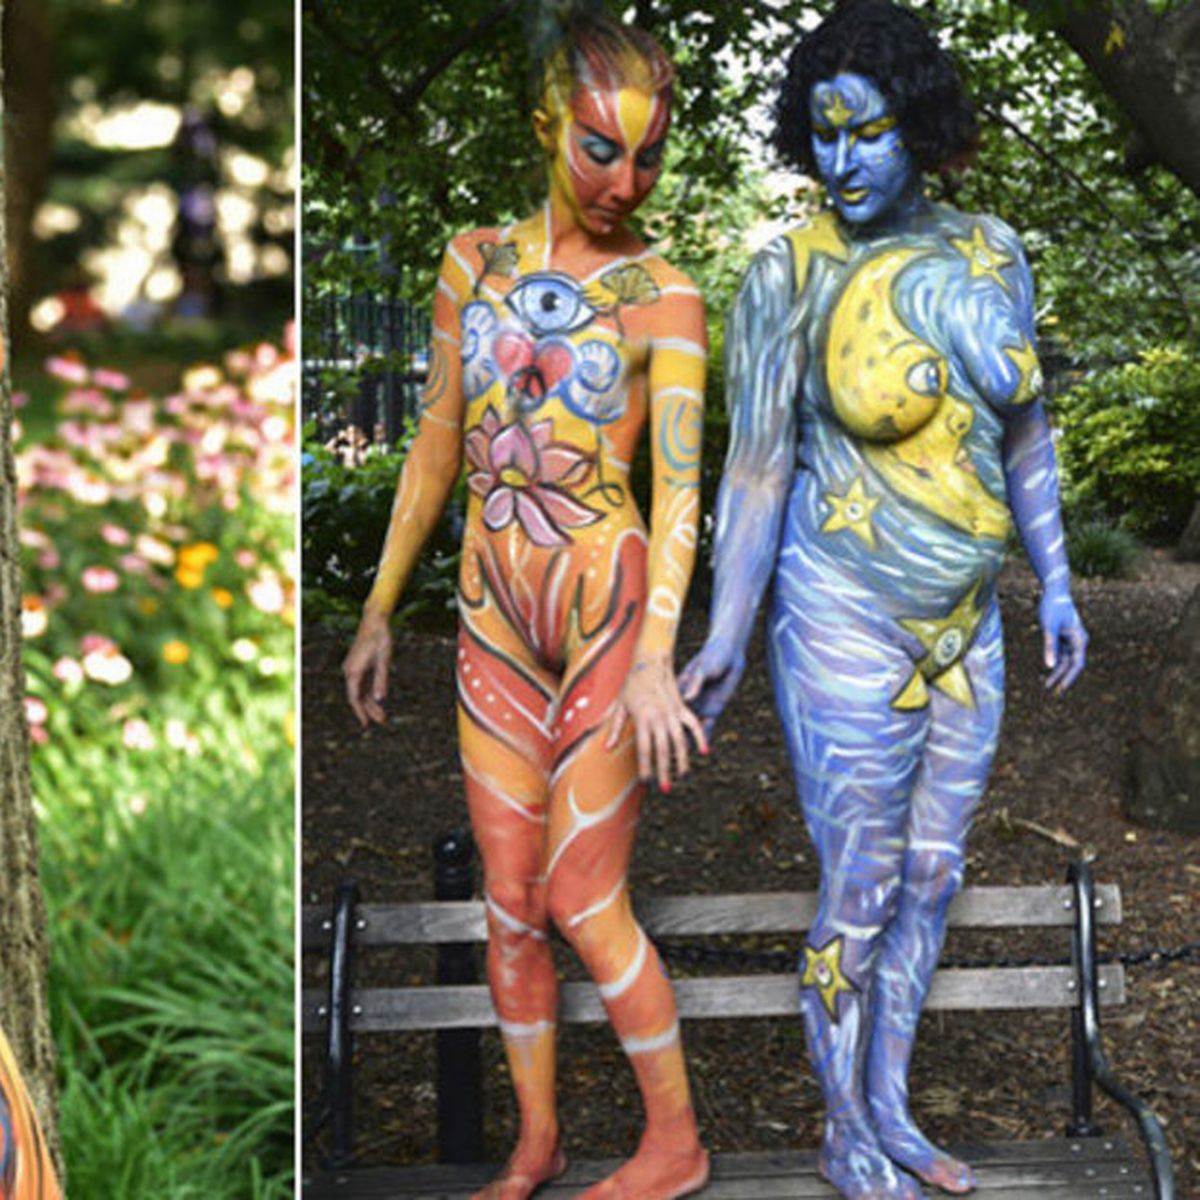 barb harden add body paint naked photo